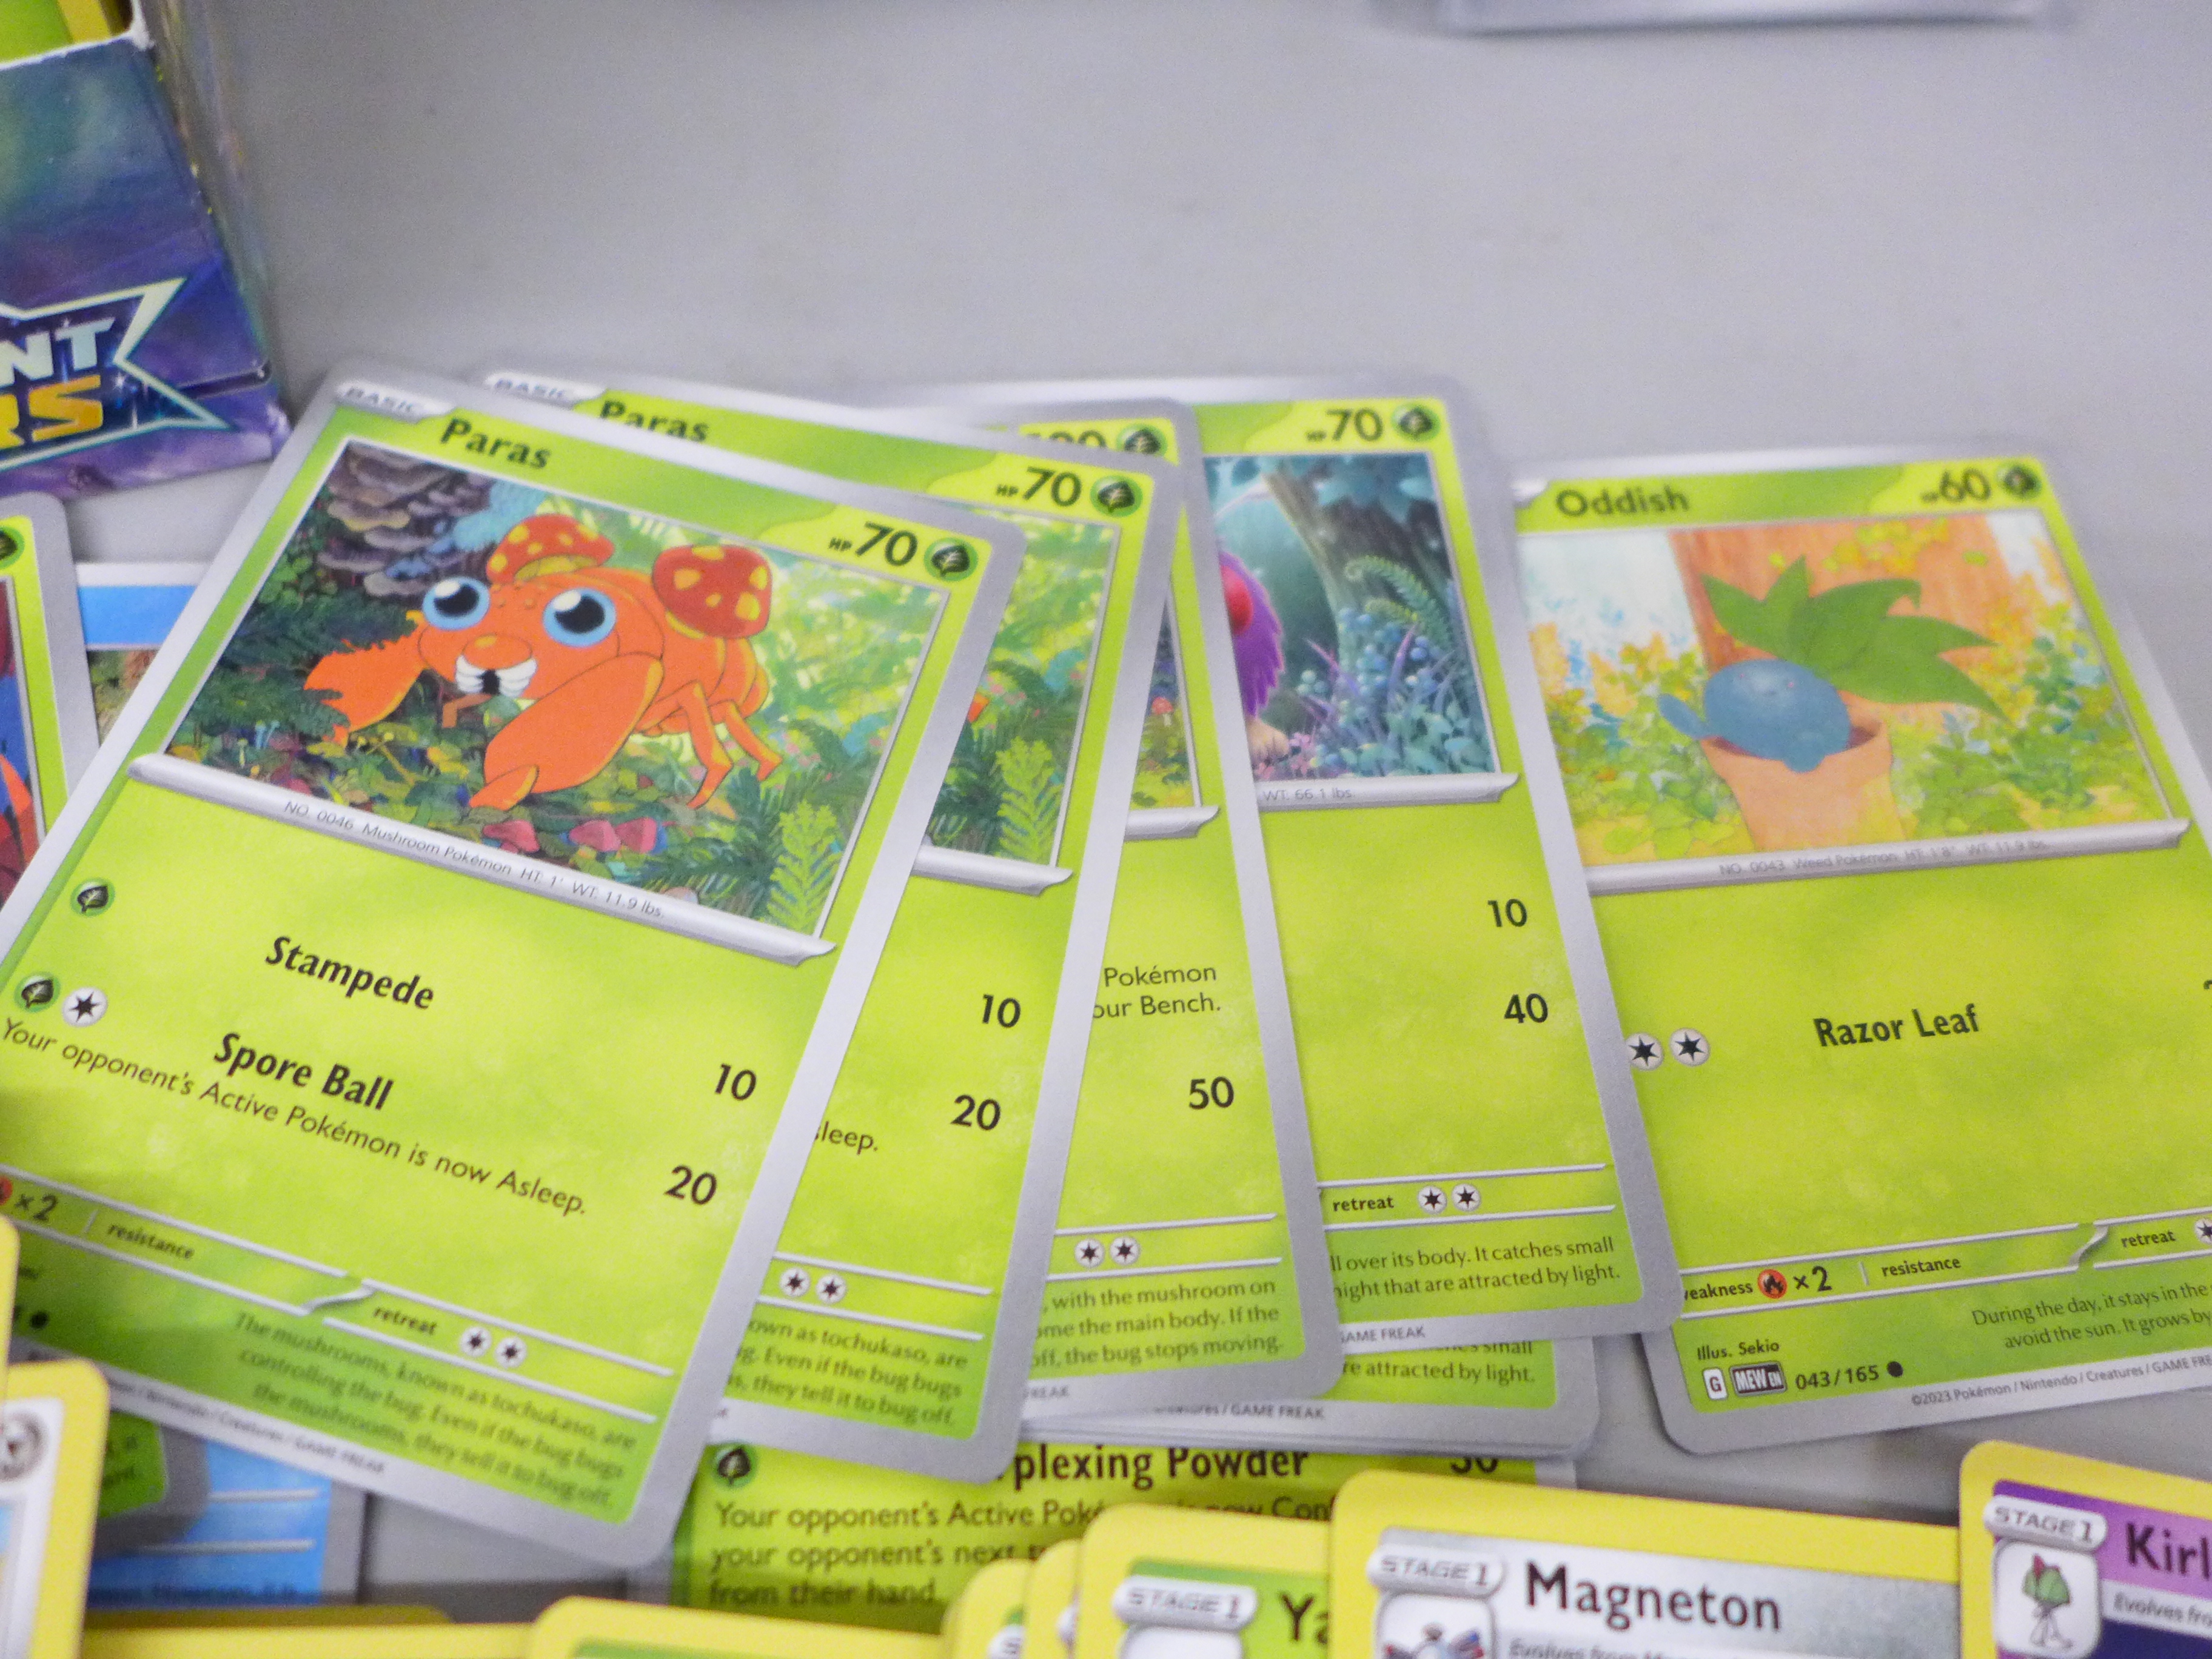 500 x Pokemon cards, including 30 holographic cards, various sets in collectors boxes - Image 3 of 4